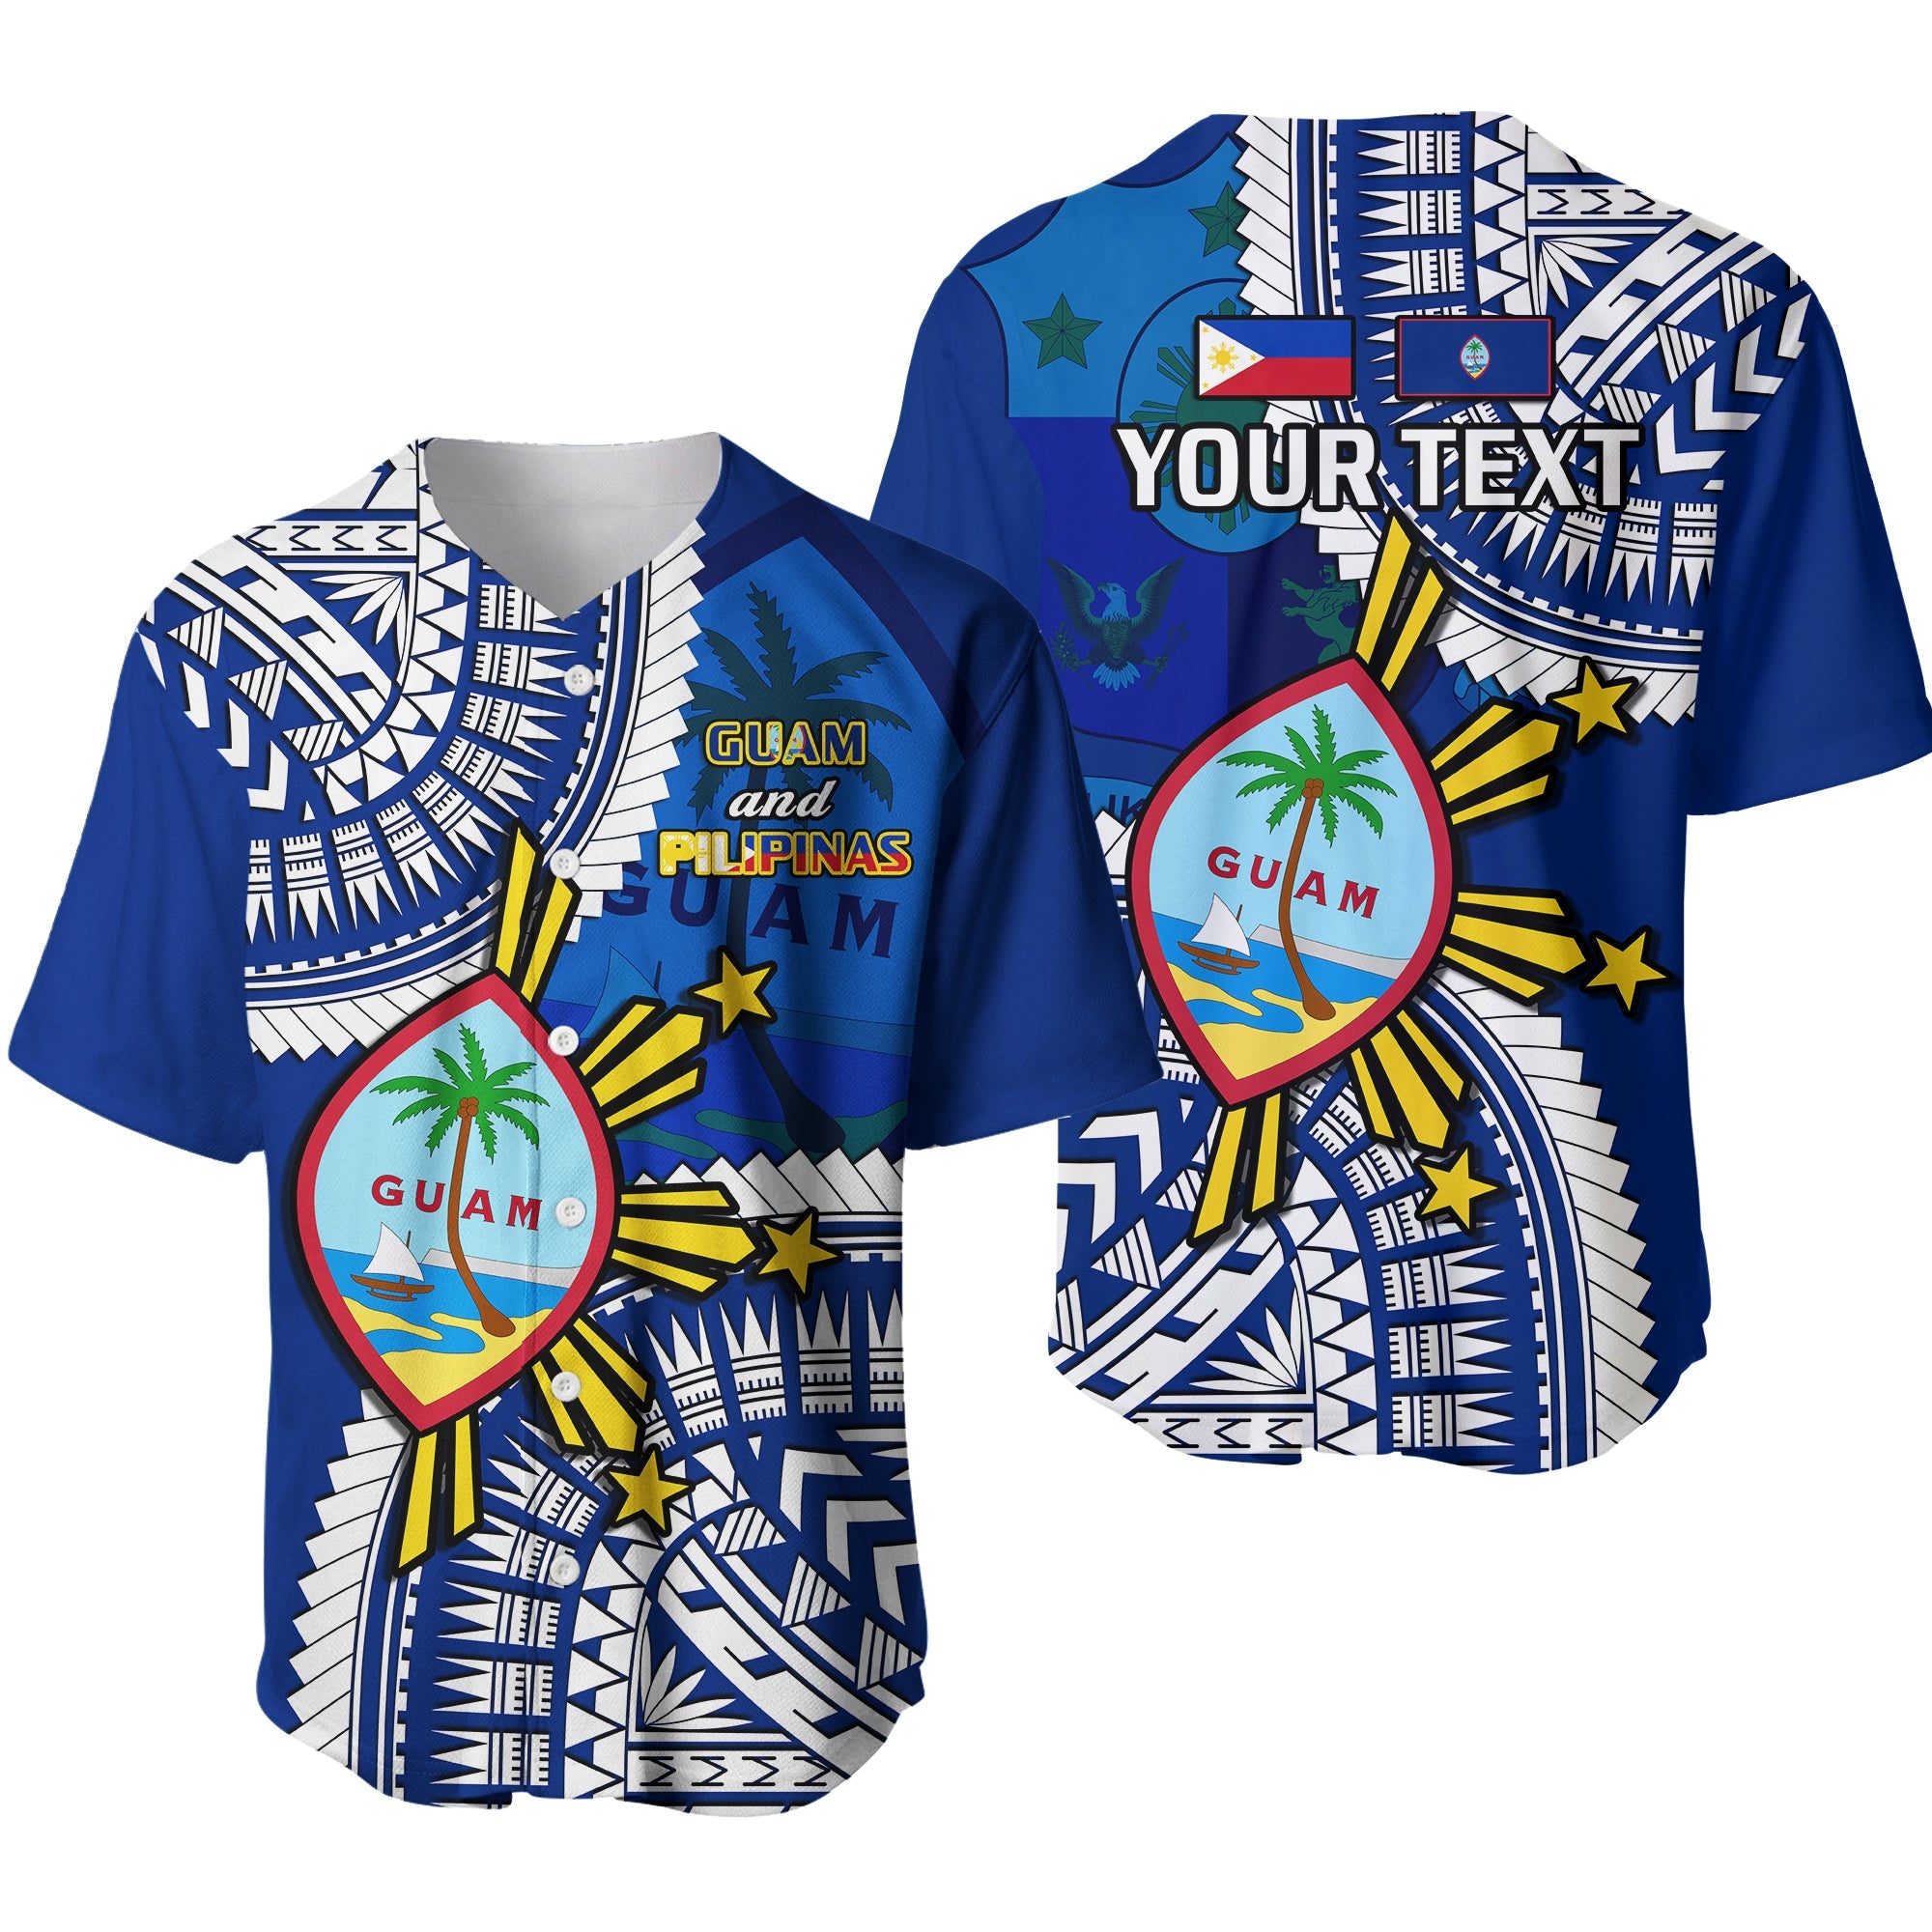 (Custom Personalised) Guam and Philippines Baseball Jersey Guaman Filipinas Together Blue Ver.01 LT14 Blue - Polynesian Pride